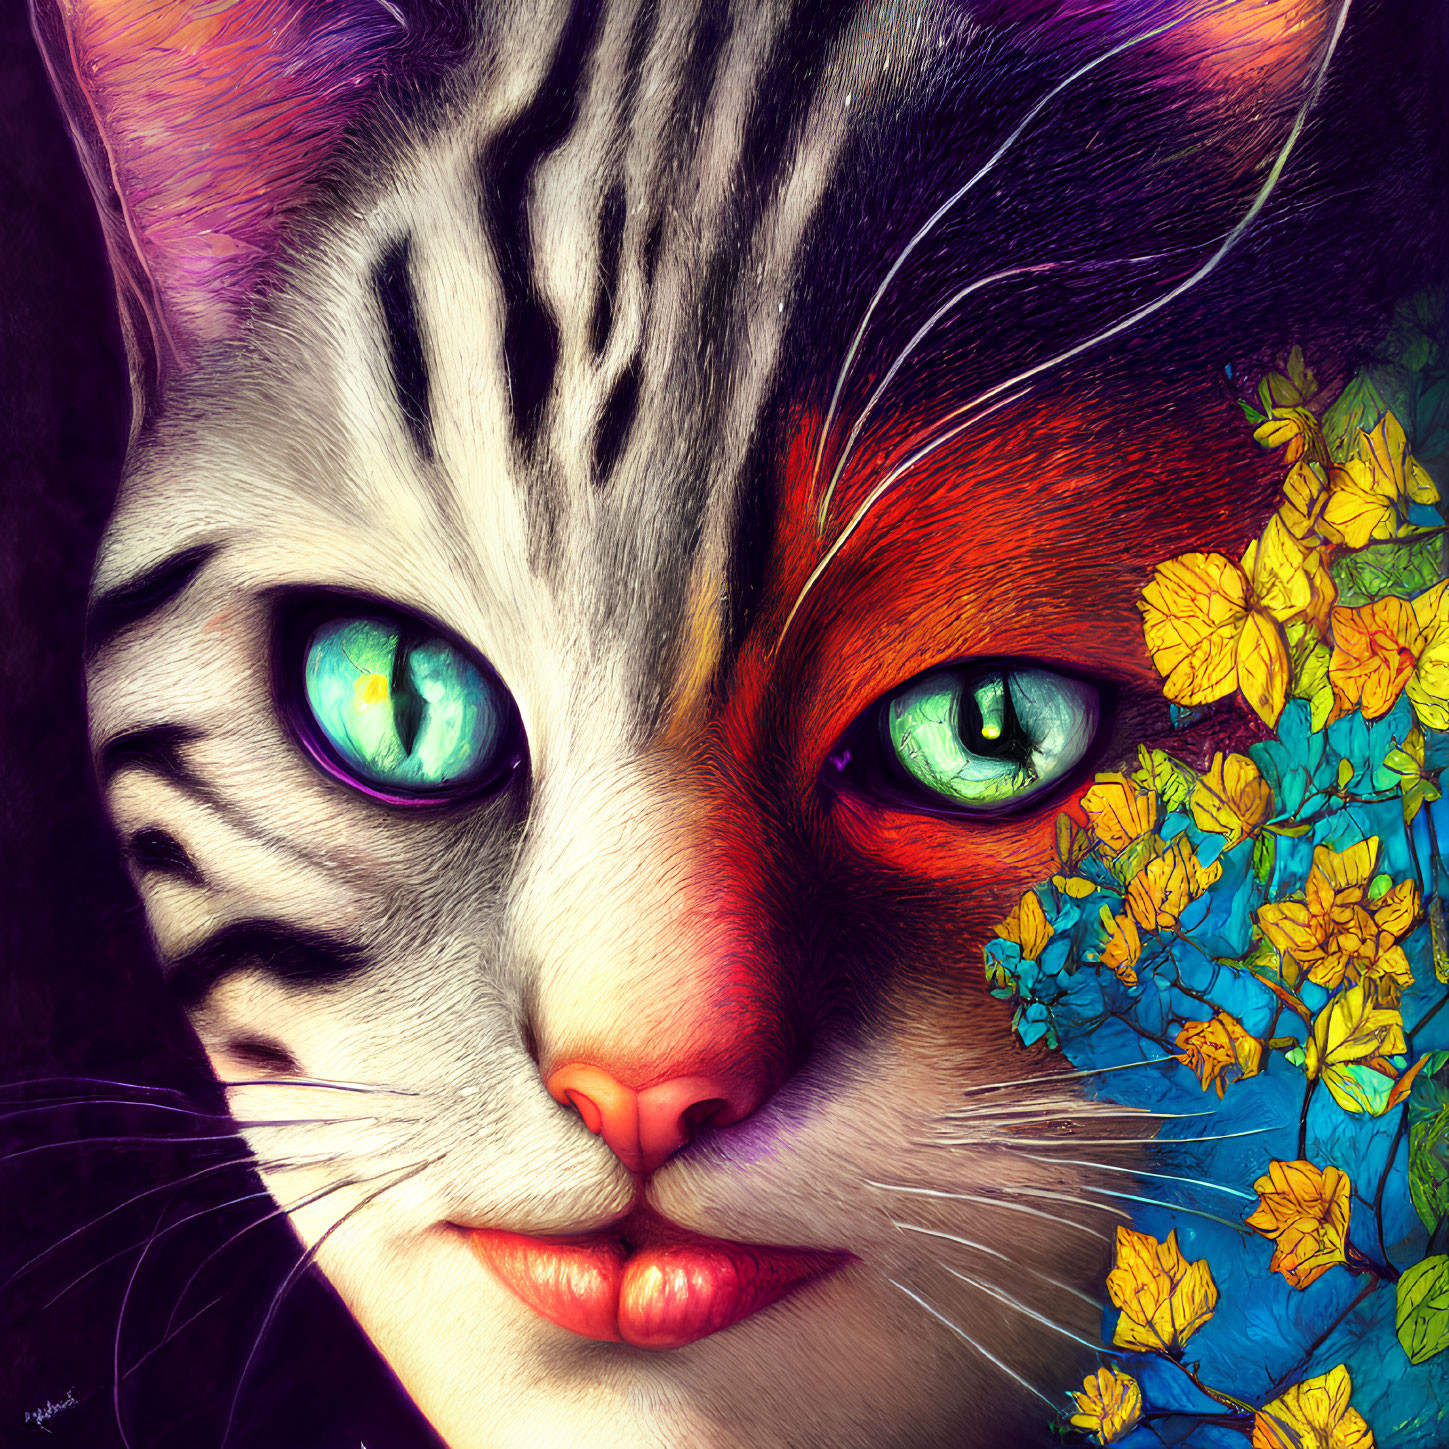 Colorful Cat Illustration with Striking Blue Eyes and Autumn Leaves Theme